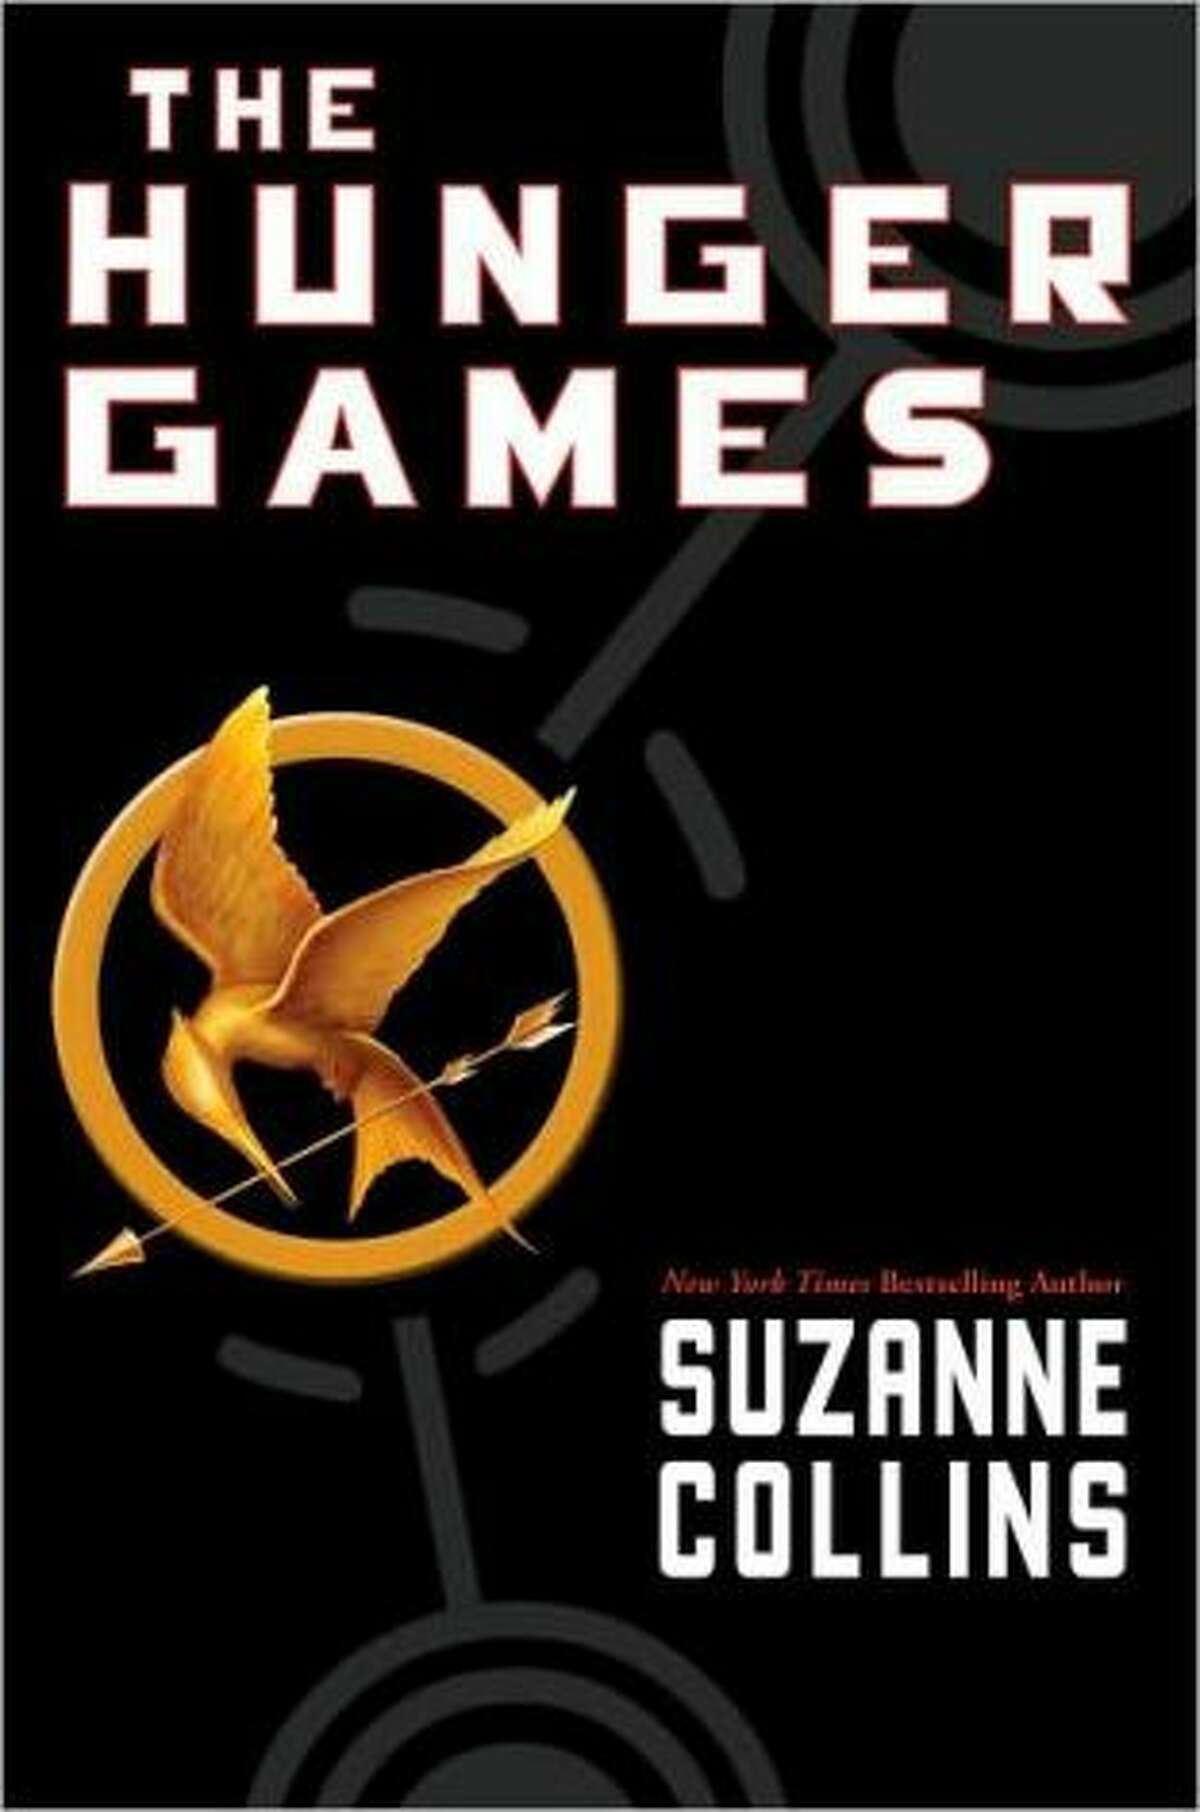 \"The Hunger Games\" (series), by Suzanne Collins Reasons: sexually explicit, violence, unsuited to age group